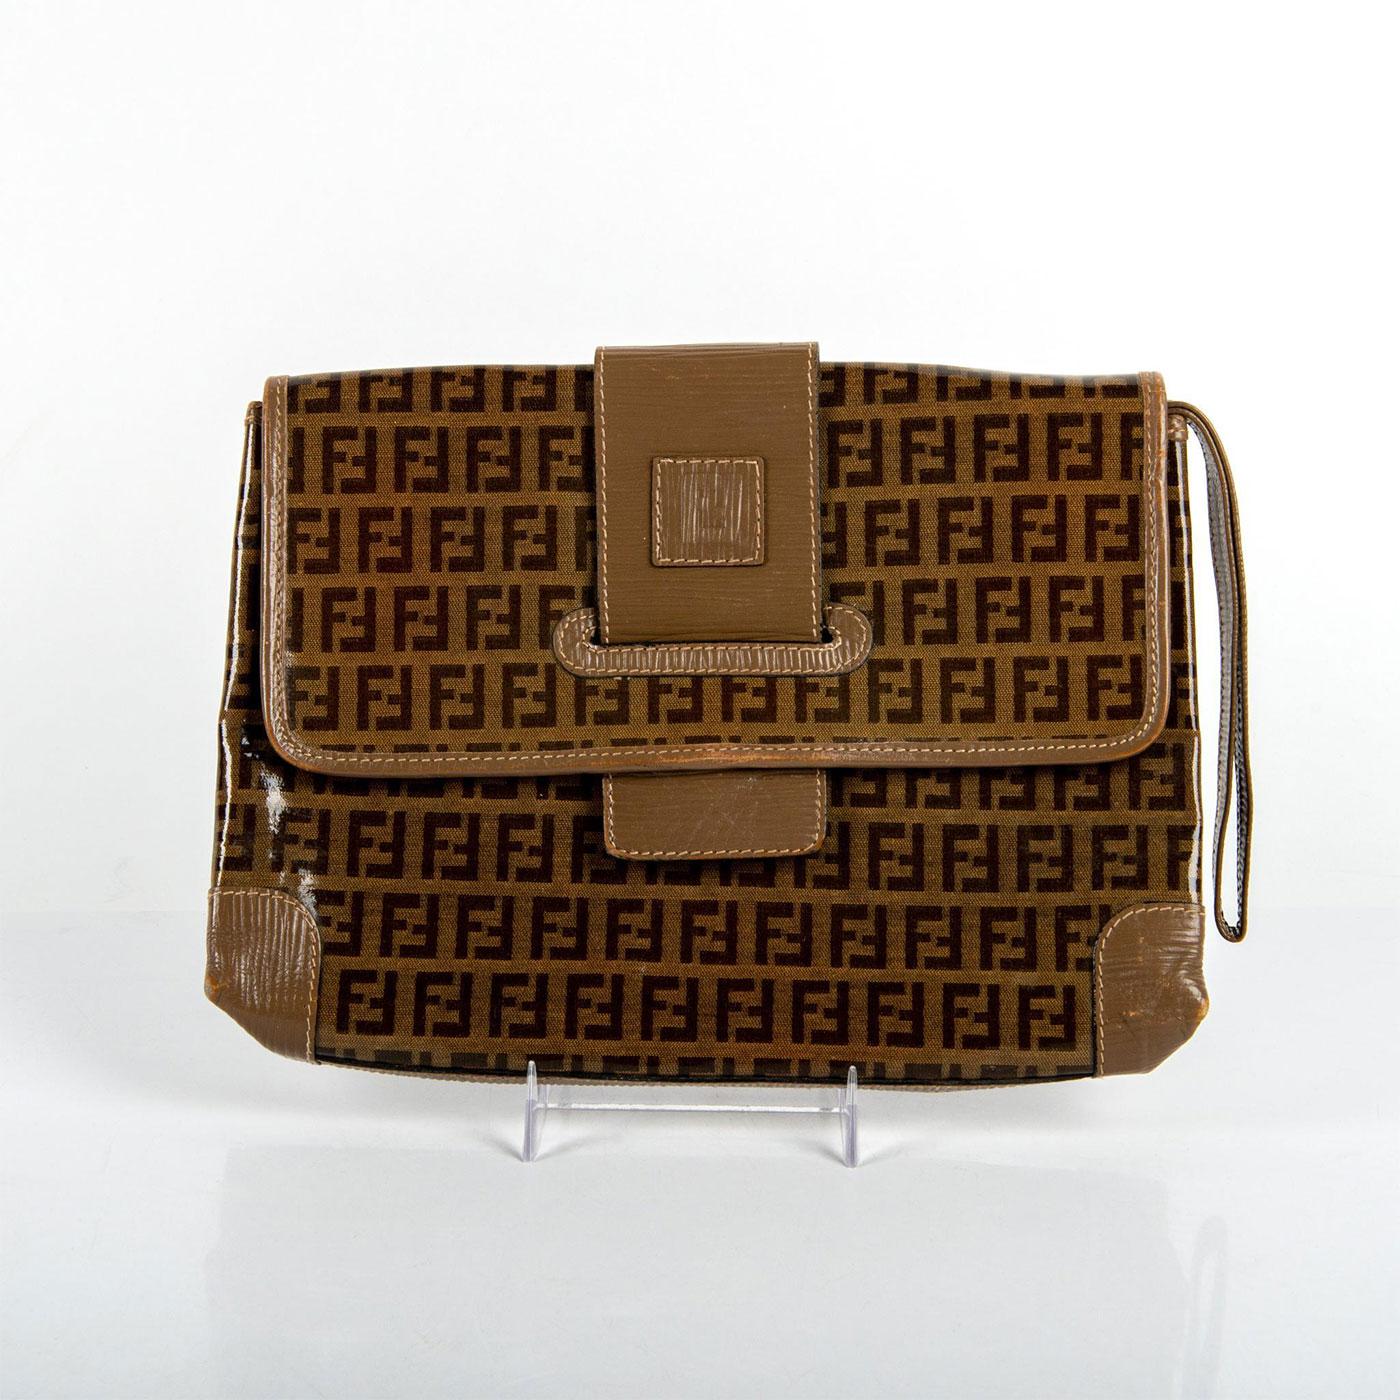 Fendi - Authenticated Clutch Bag - Leather Brown Plain for Women, Never Worn